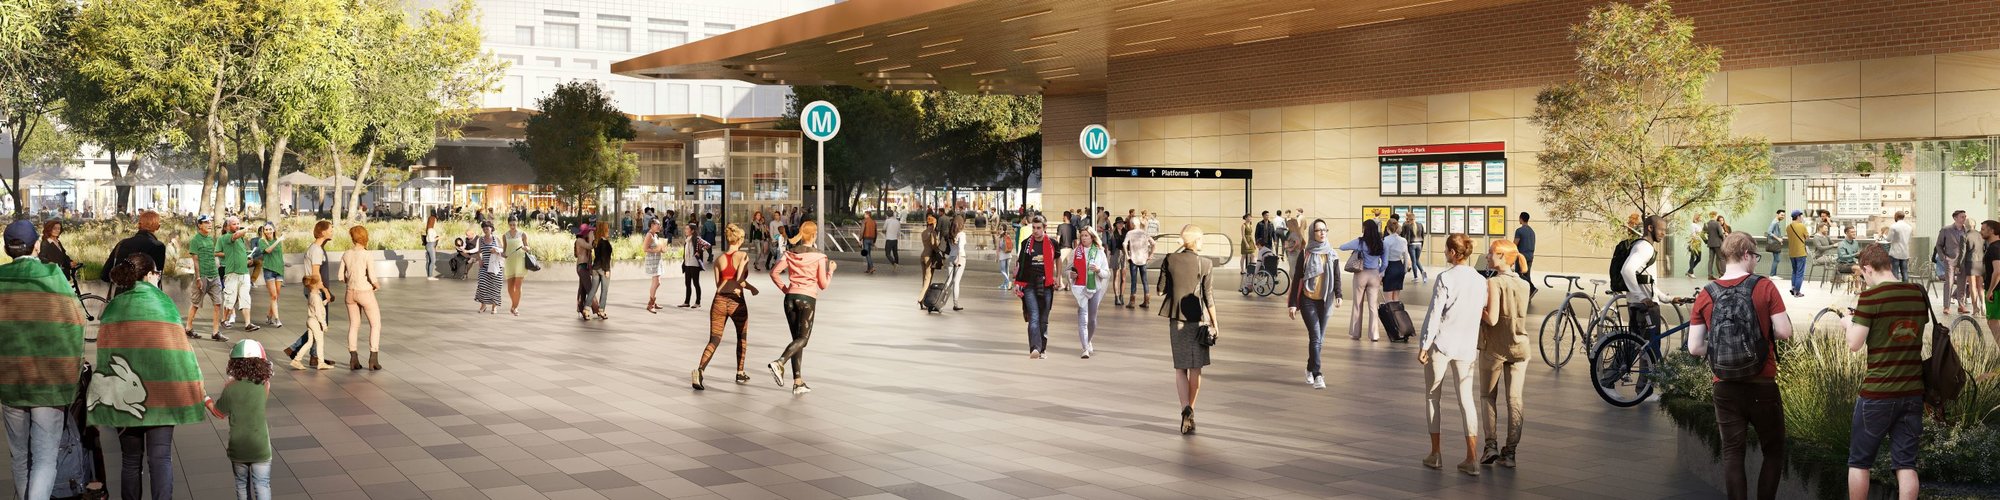 An artist's impression of commuters walking around outside the new Sydney Olympic Park metro station.